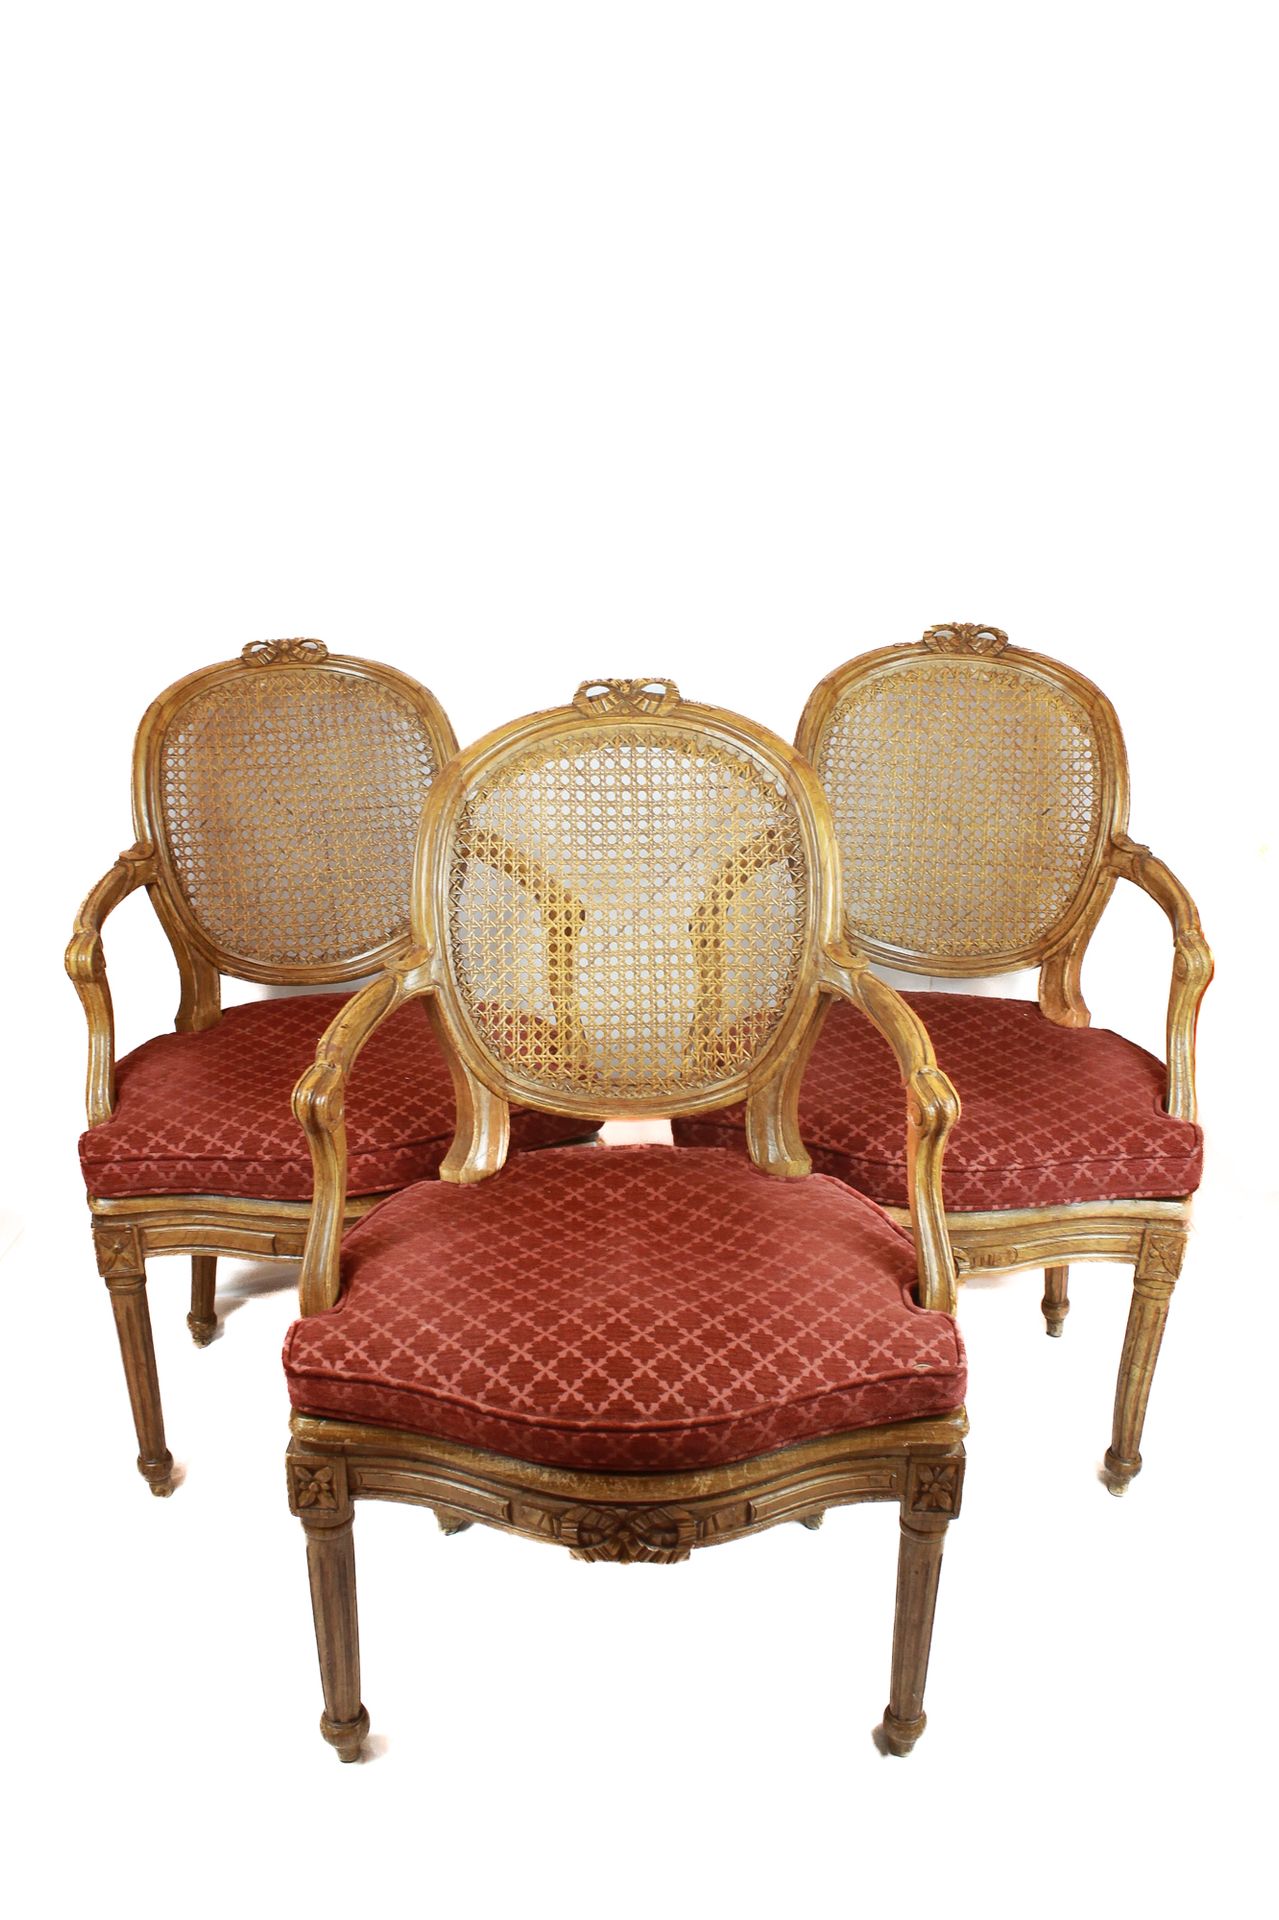 Set of 8 armchairs 95 x 60 x 48cm
In beech wood, with medallion back